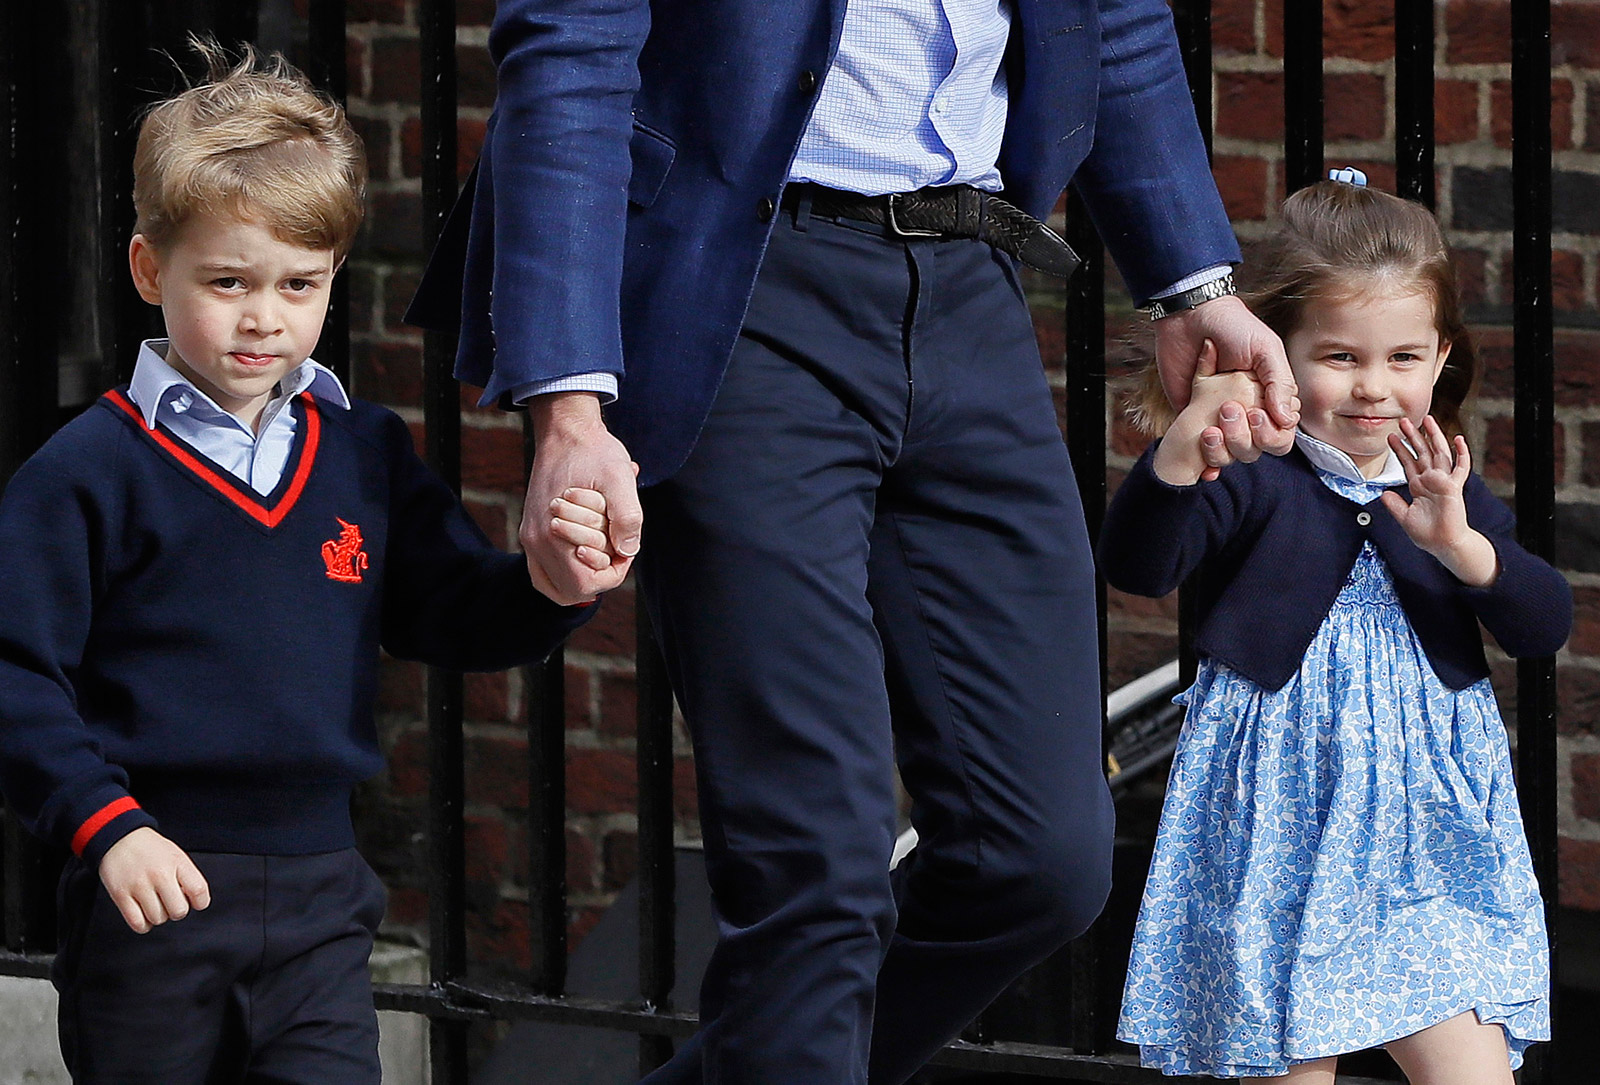 Its a boy! Photos of the new royal baby